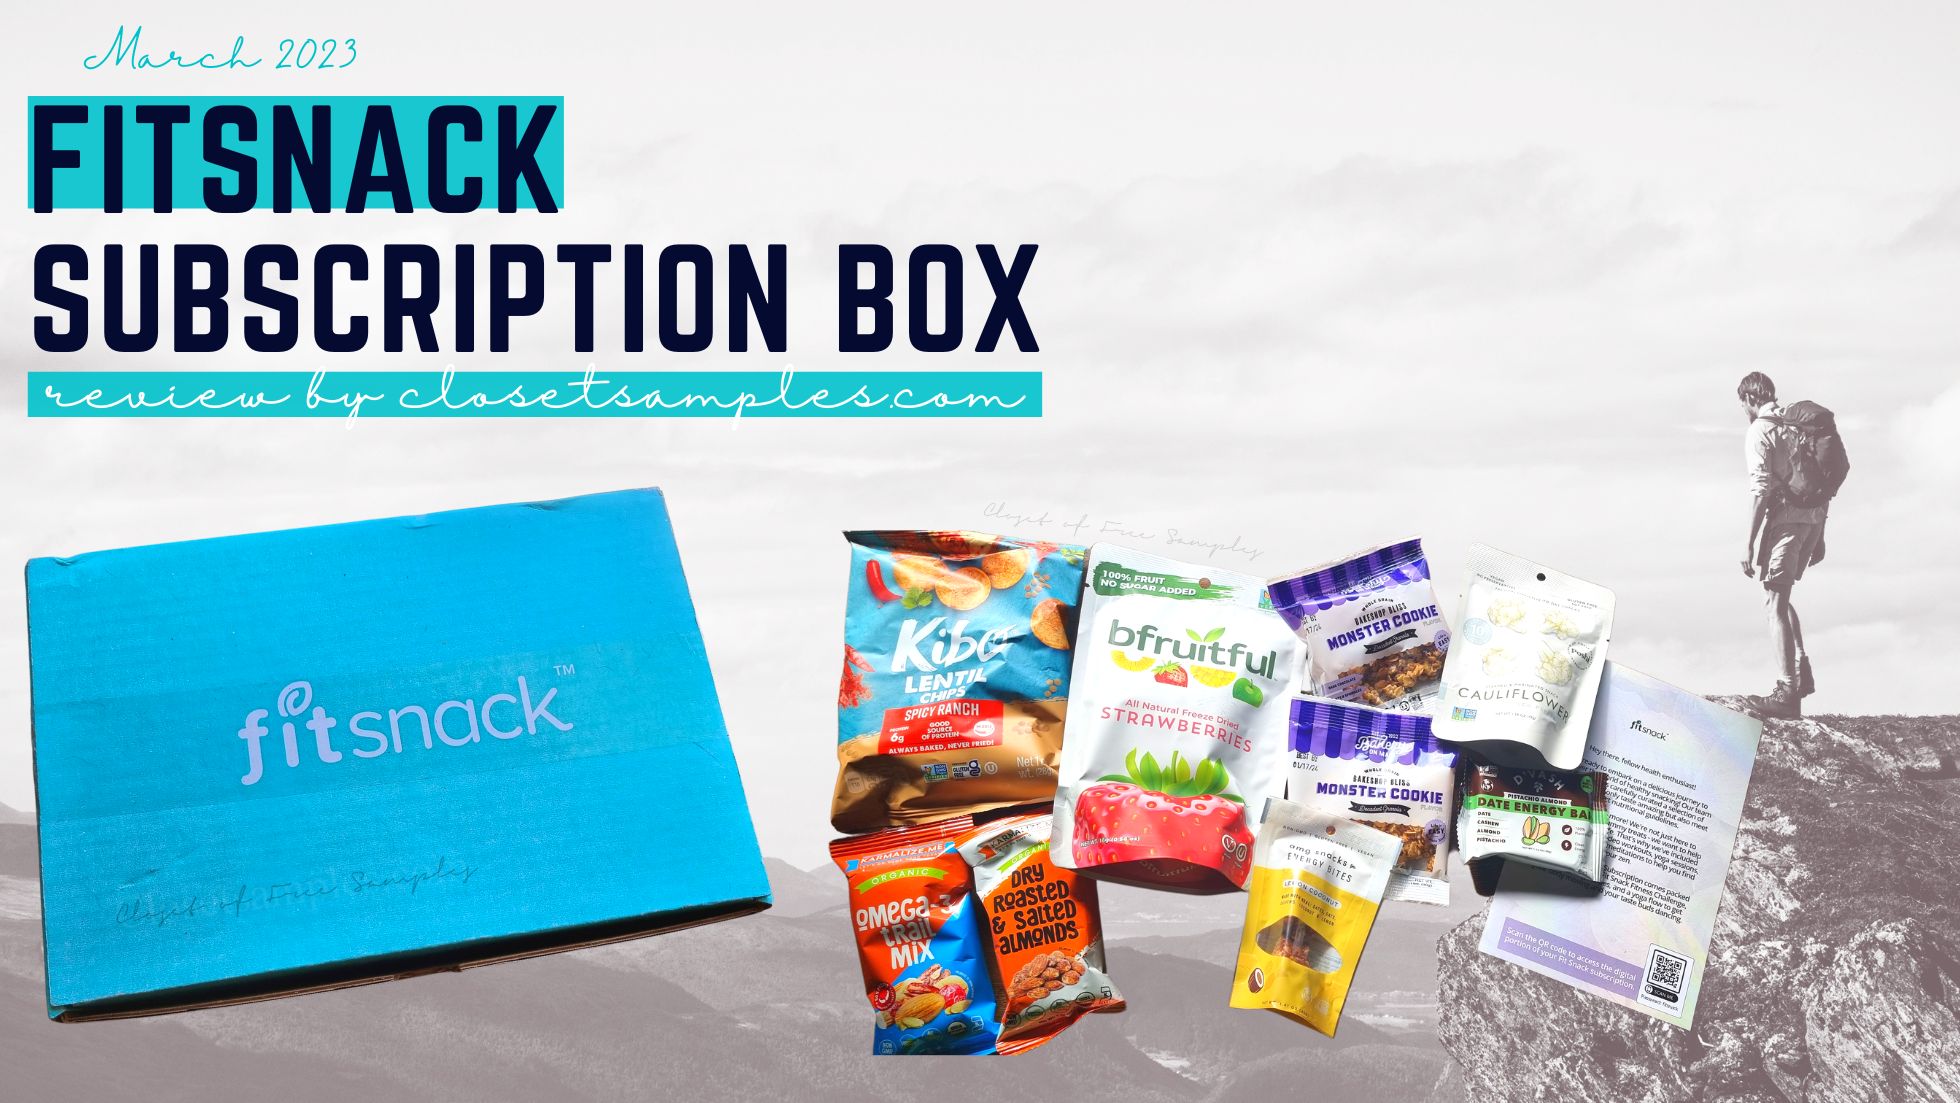 FitSnack Subscription Box March 2023 Review closetsamples